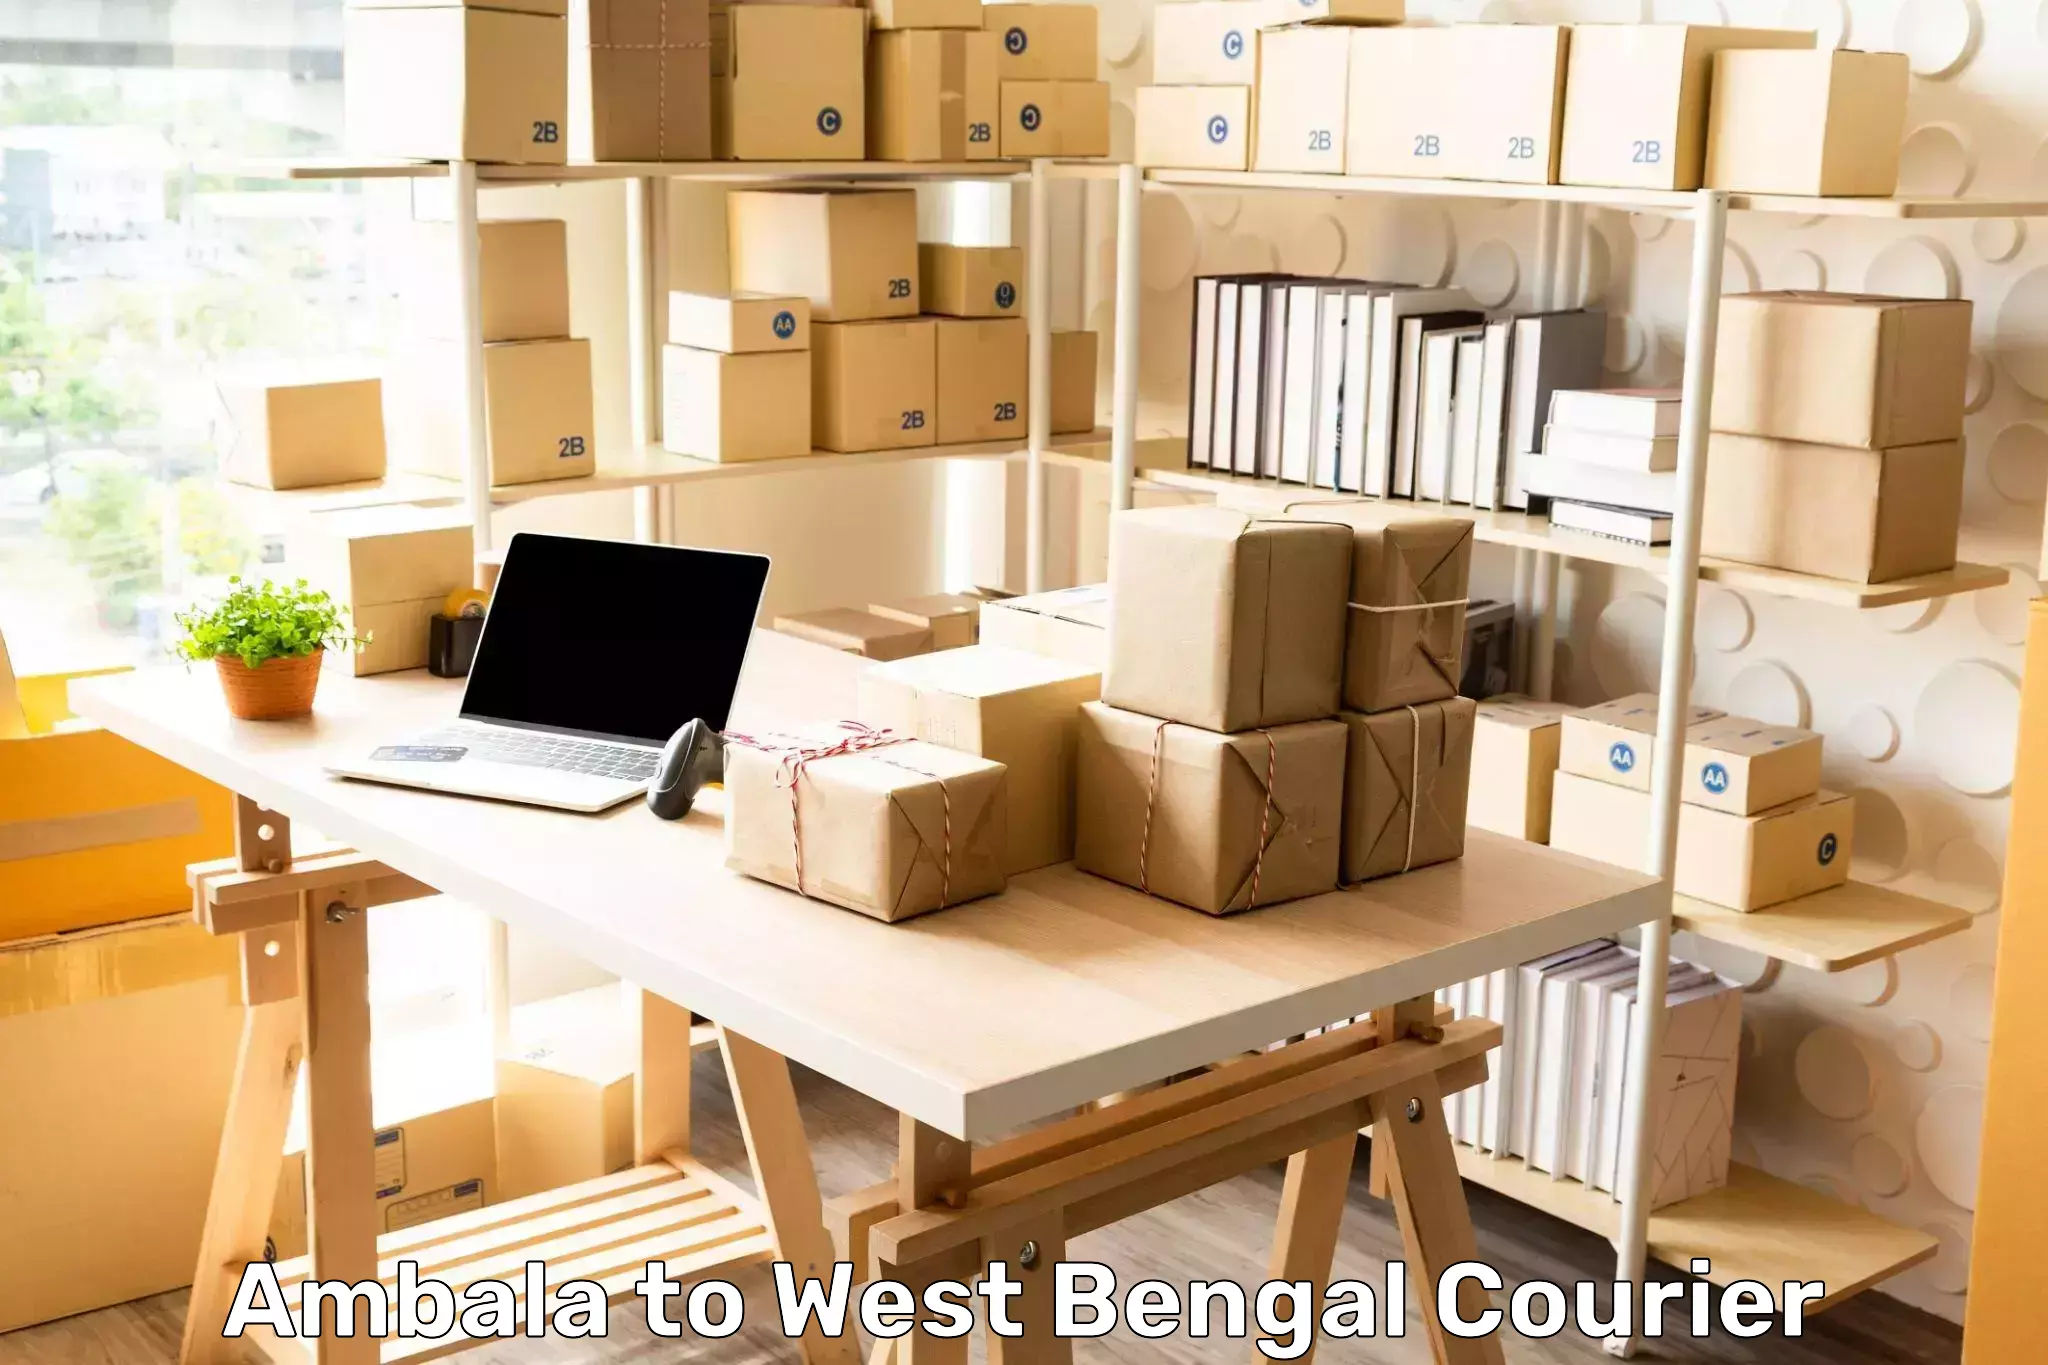 Next-day freight services Ambala to West Bengal